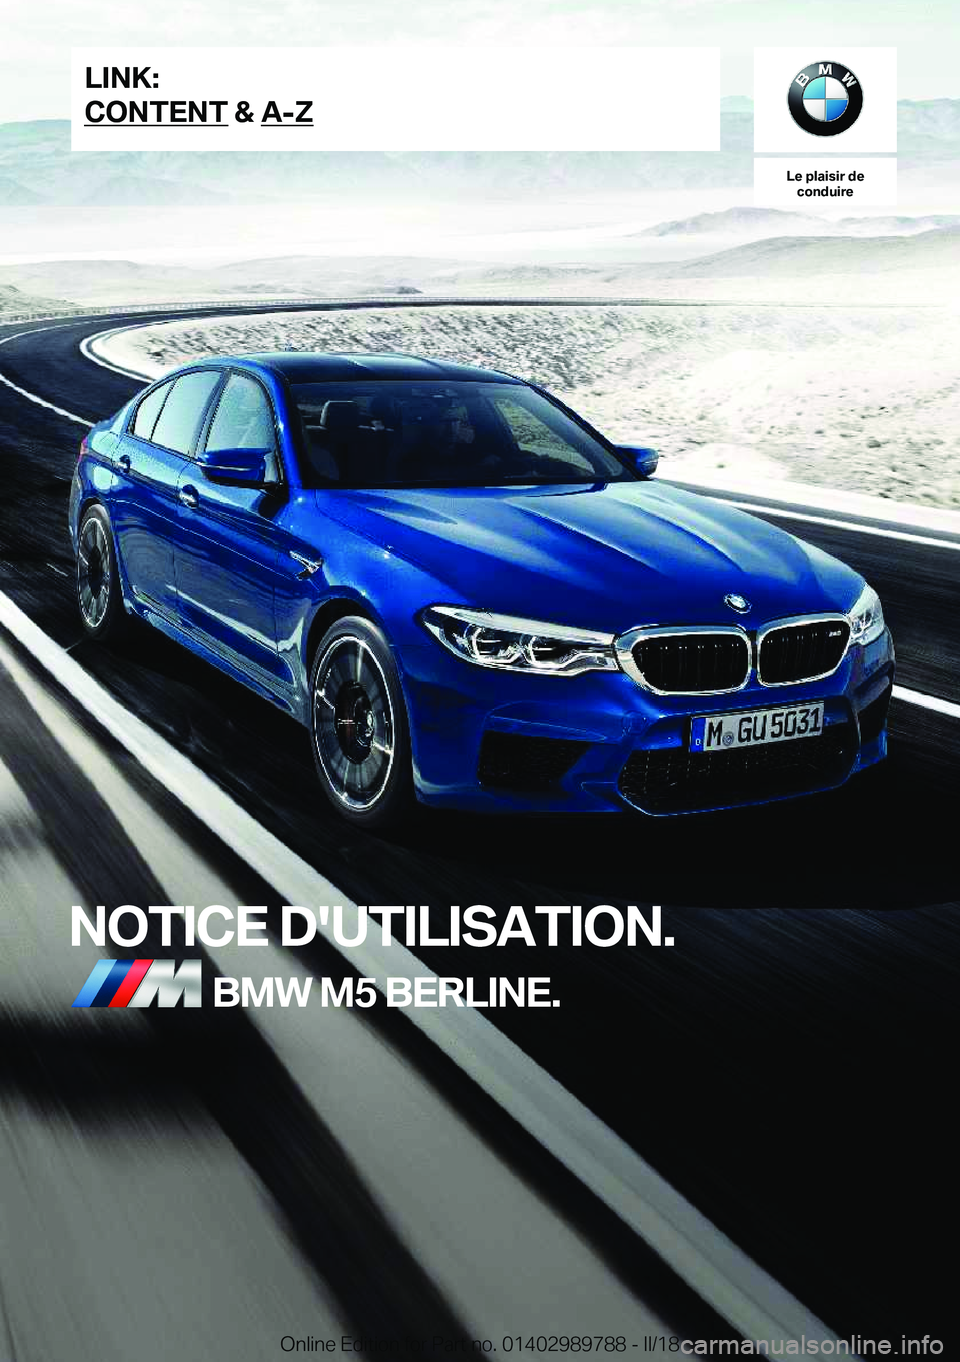 BMW M5 2018  Notices Demploi (in French) �L�e��p�l�a�i�s�i�r��d�e�c�o�n�d�u�i�r�e
�N�O�T�I�C�E��D�'�U�T�I�L�I�S�A�T�I�O�N�.�B�M�W��M�5��B�E�R�L�I�N�E�.�L�I�N�K�:
�C�O�N�T�E�N�T��&��A�-�Z�O�n�l�i�n�e� �E�d�i�t�i�o�n� �f�o�r� �P�a�r